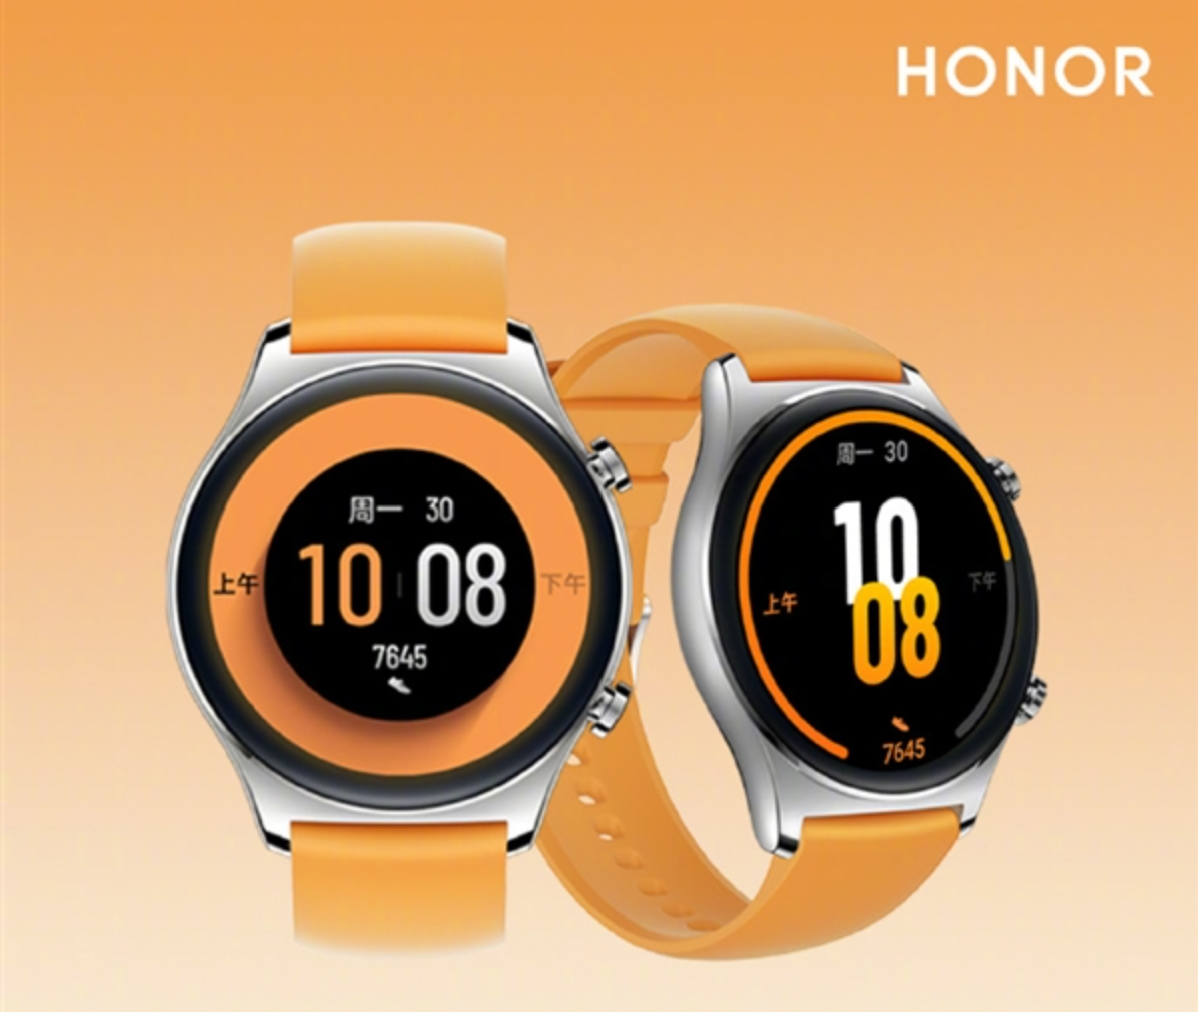 Dare to Explore – win an HONOR Watch GS Pro smartwatch - AW